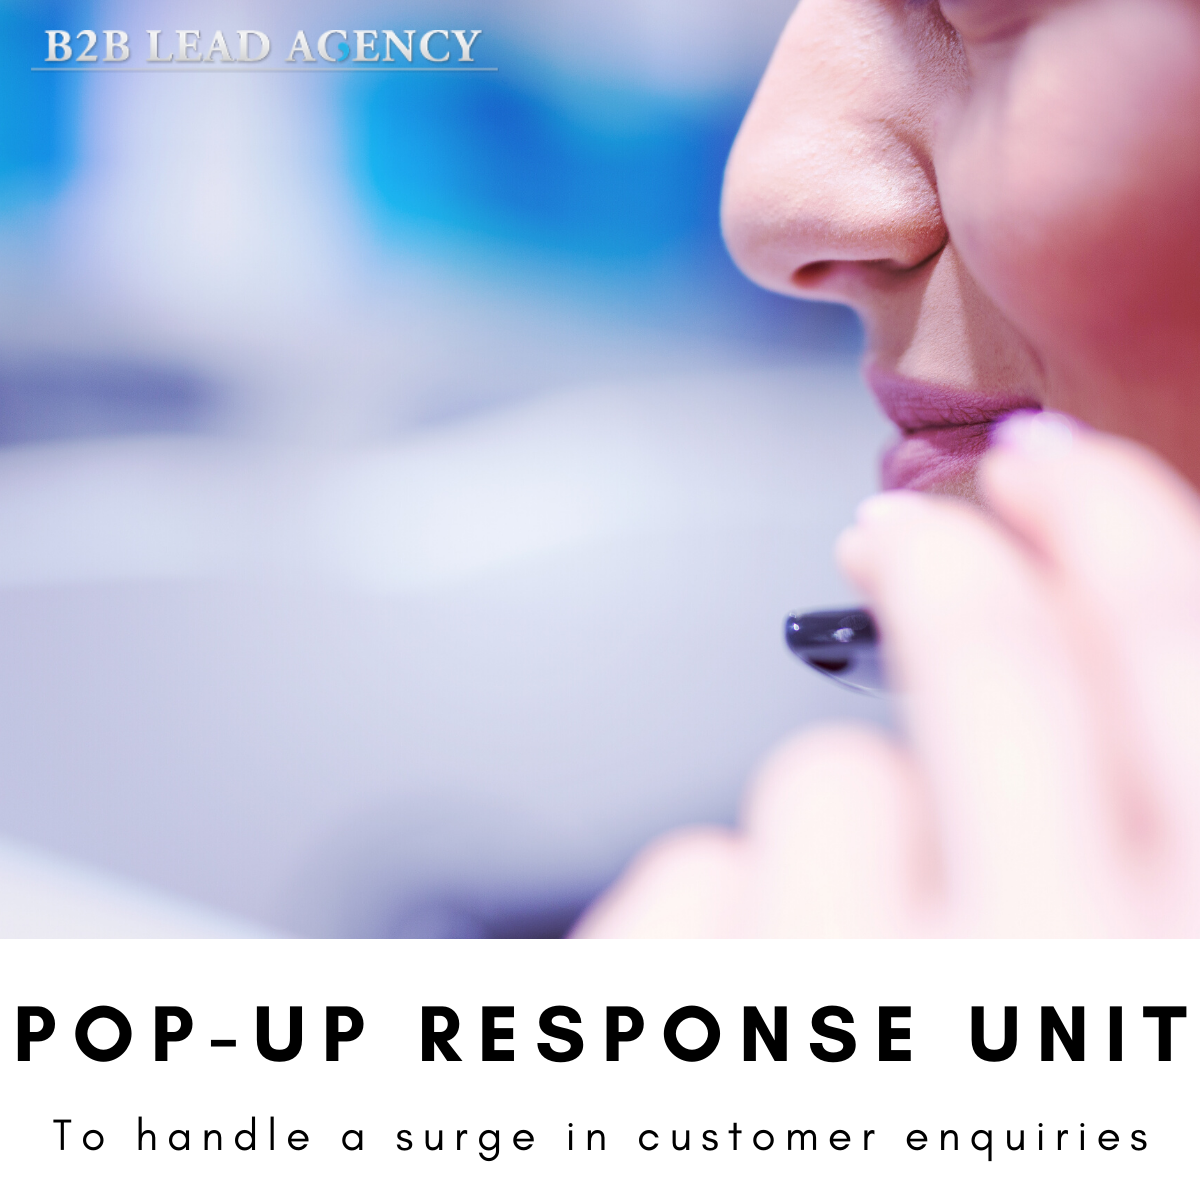 Pop-up Response Unit. To handle a surge in customer enquiries